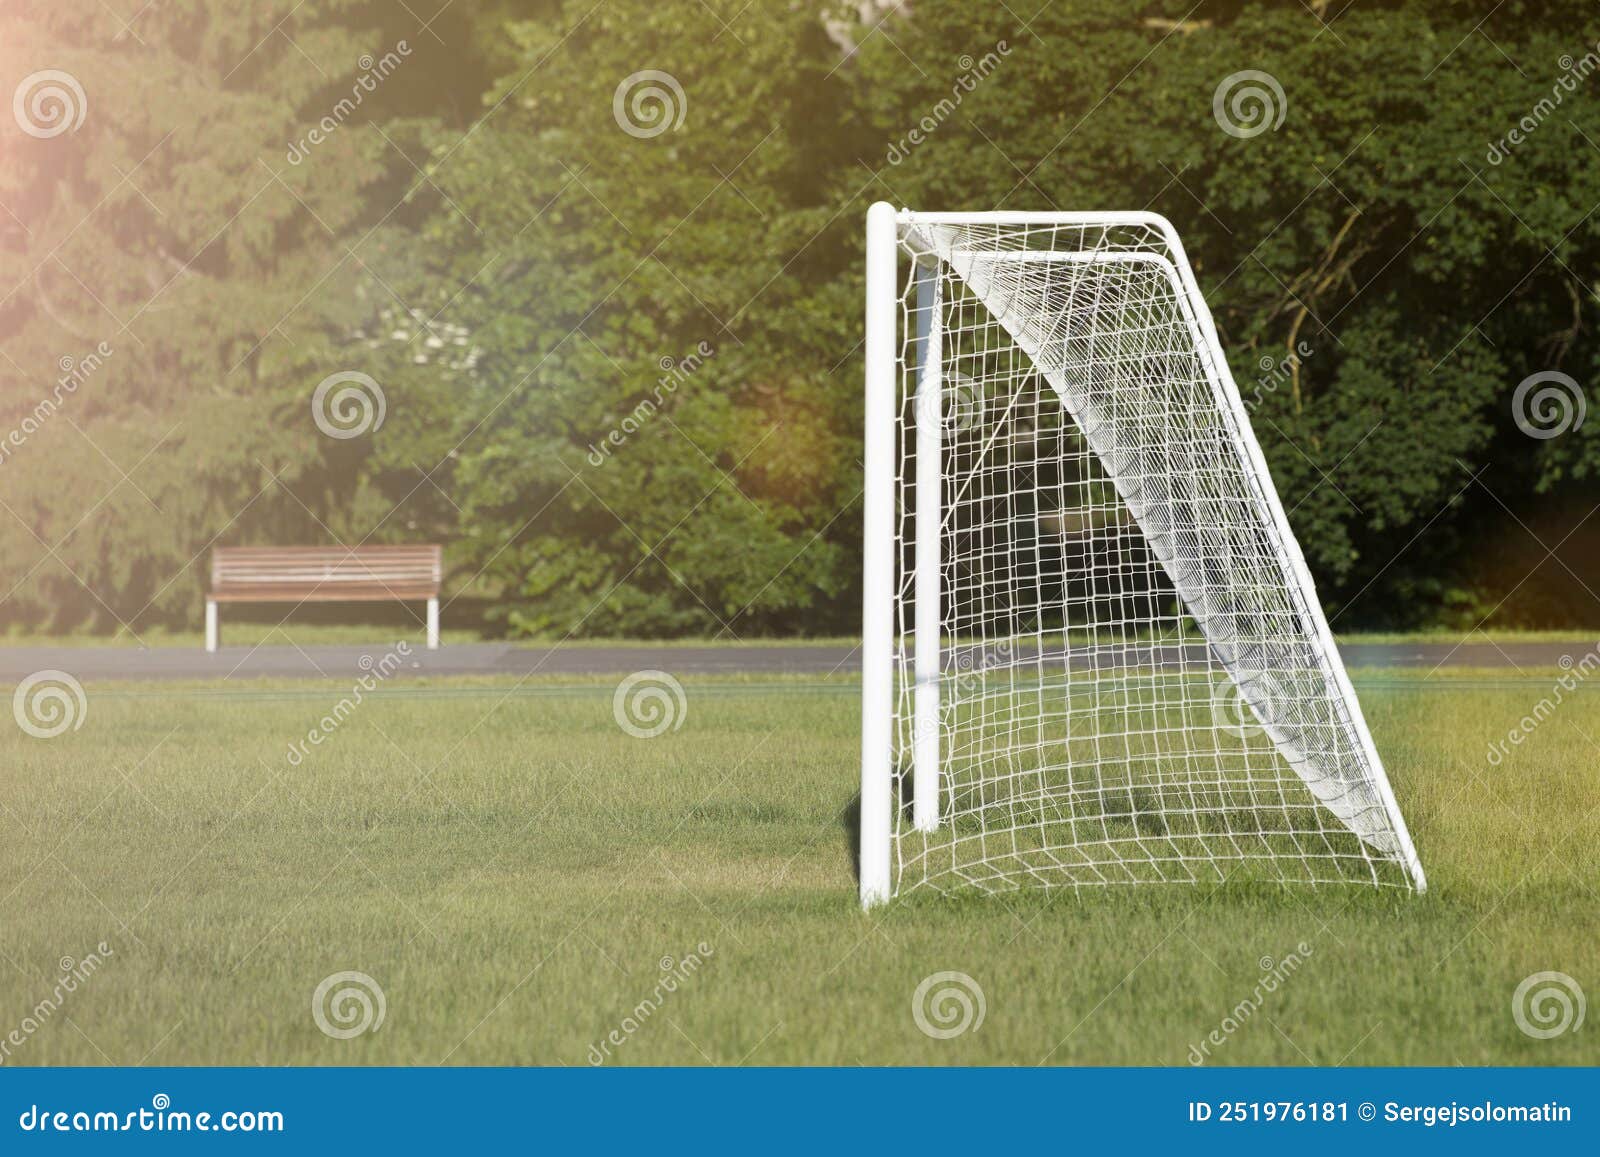 147 Side View Soccer Net Stock Photos - Free & Royalty-Free Stock Photos  from Dreamstime